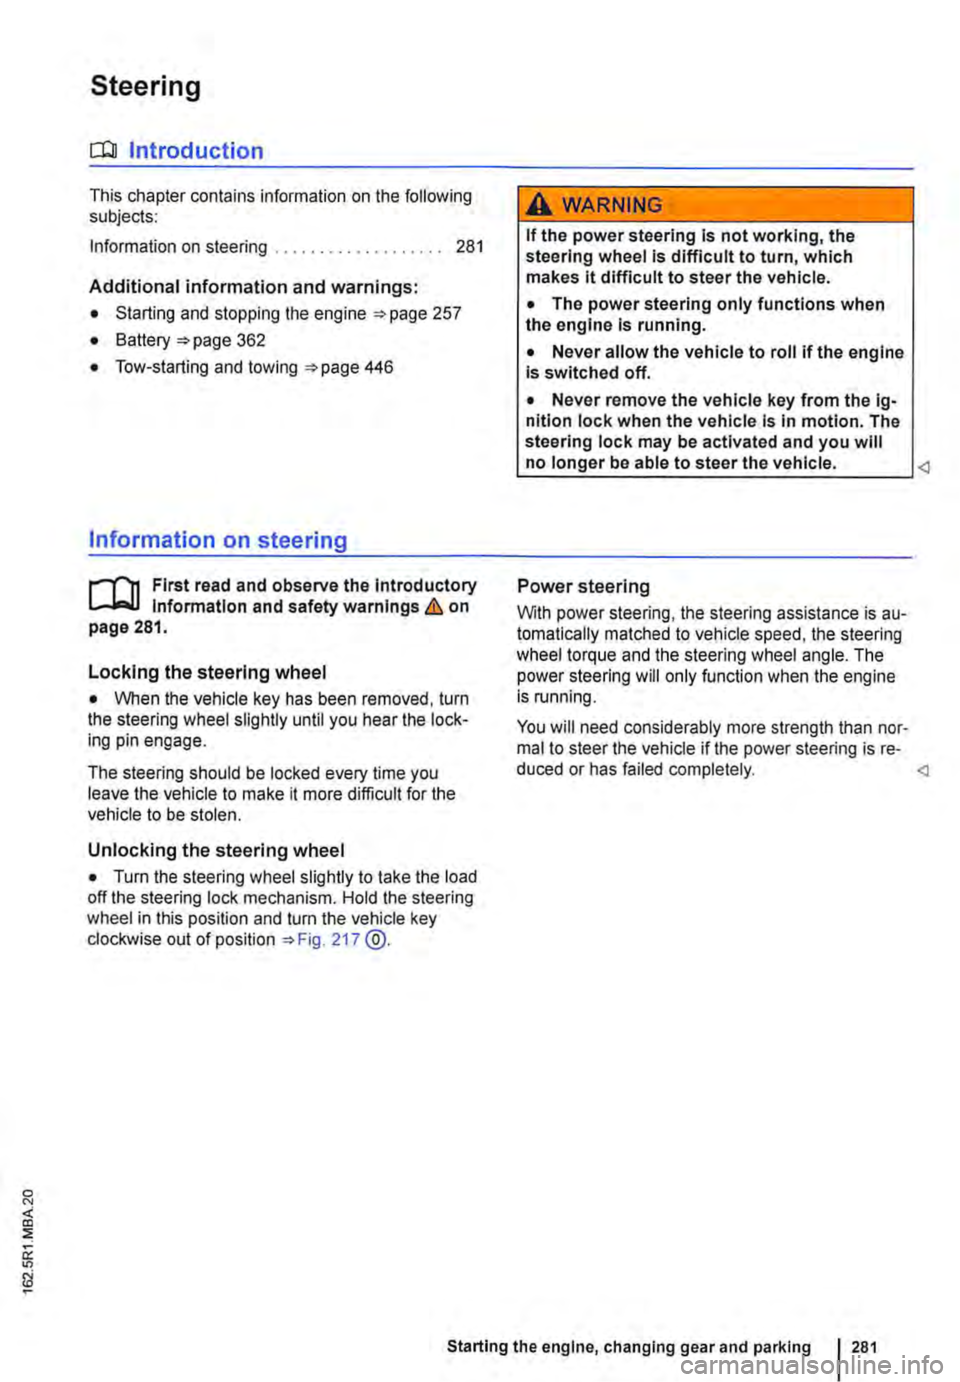 VOLKSWAGEN TRANSPORTER 2020  Owners Manual Steering 
CJ:n Introduction 
This chapter contains information on the following subjects: 
Information on steering . . . . . . .  . . . . .  . . . . . . . 281 
Additional information and warnings: 
�